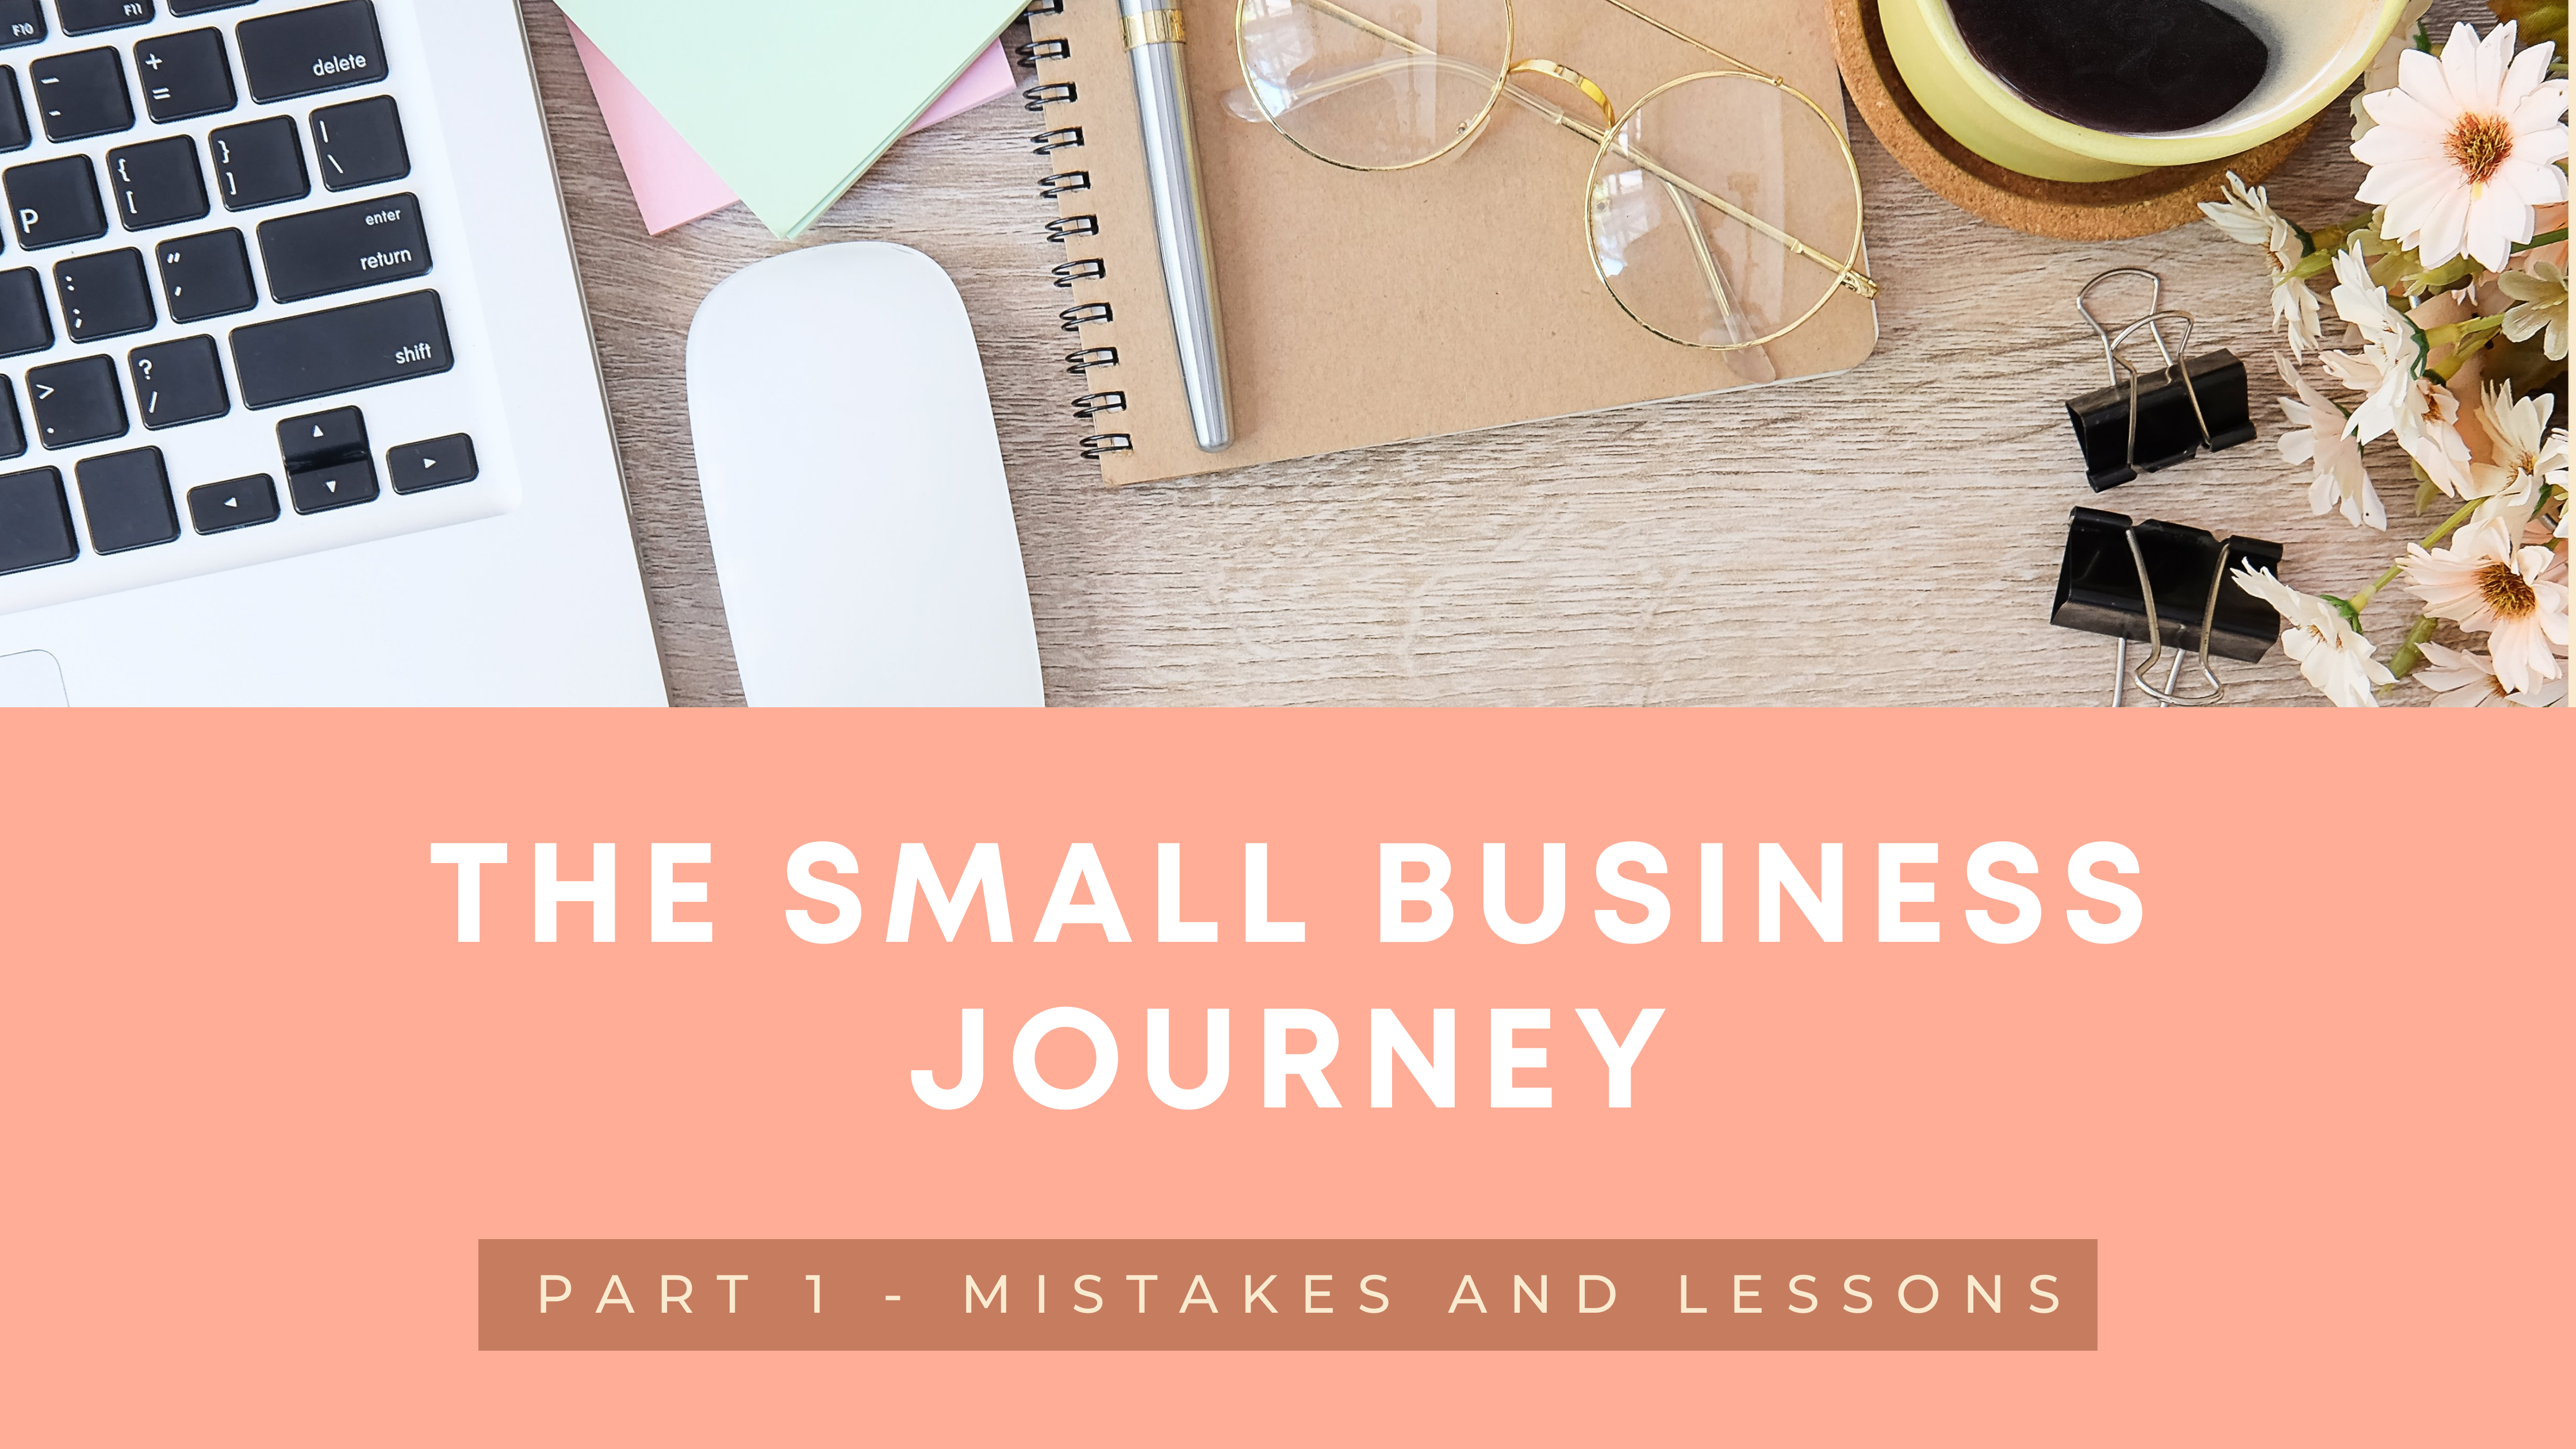 The Small Business Journey: Part 1 - Mistakes and Lessons